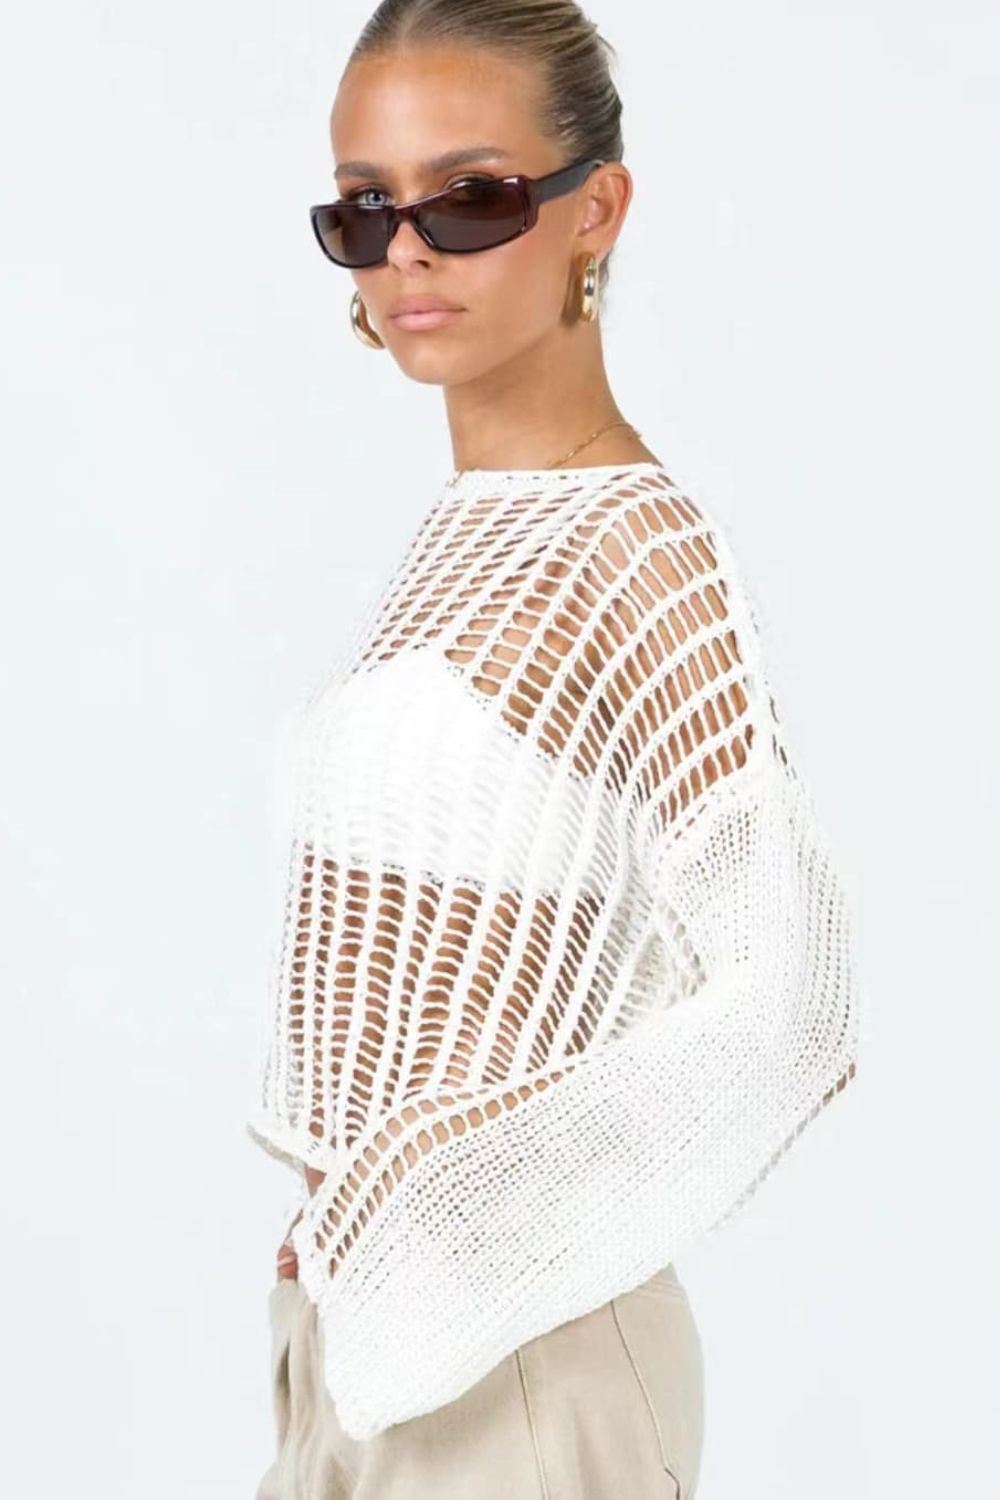 Openwork Boat Neck Long Sleeve Cover Up - nailedmoms